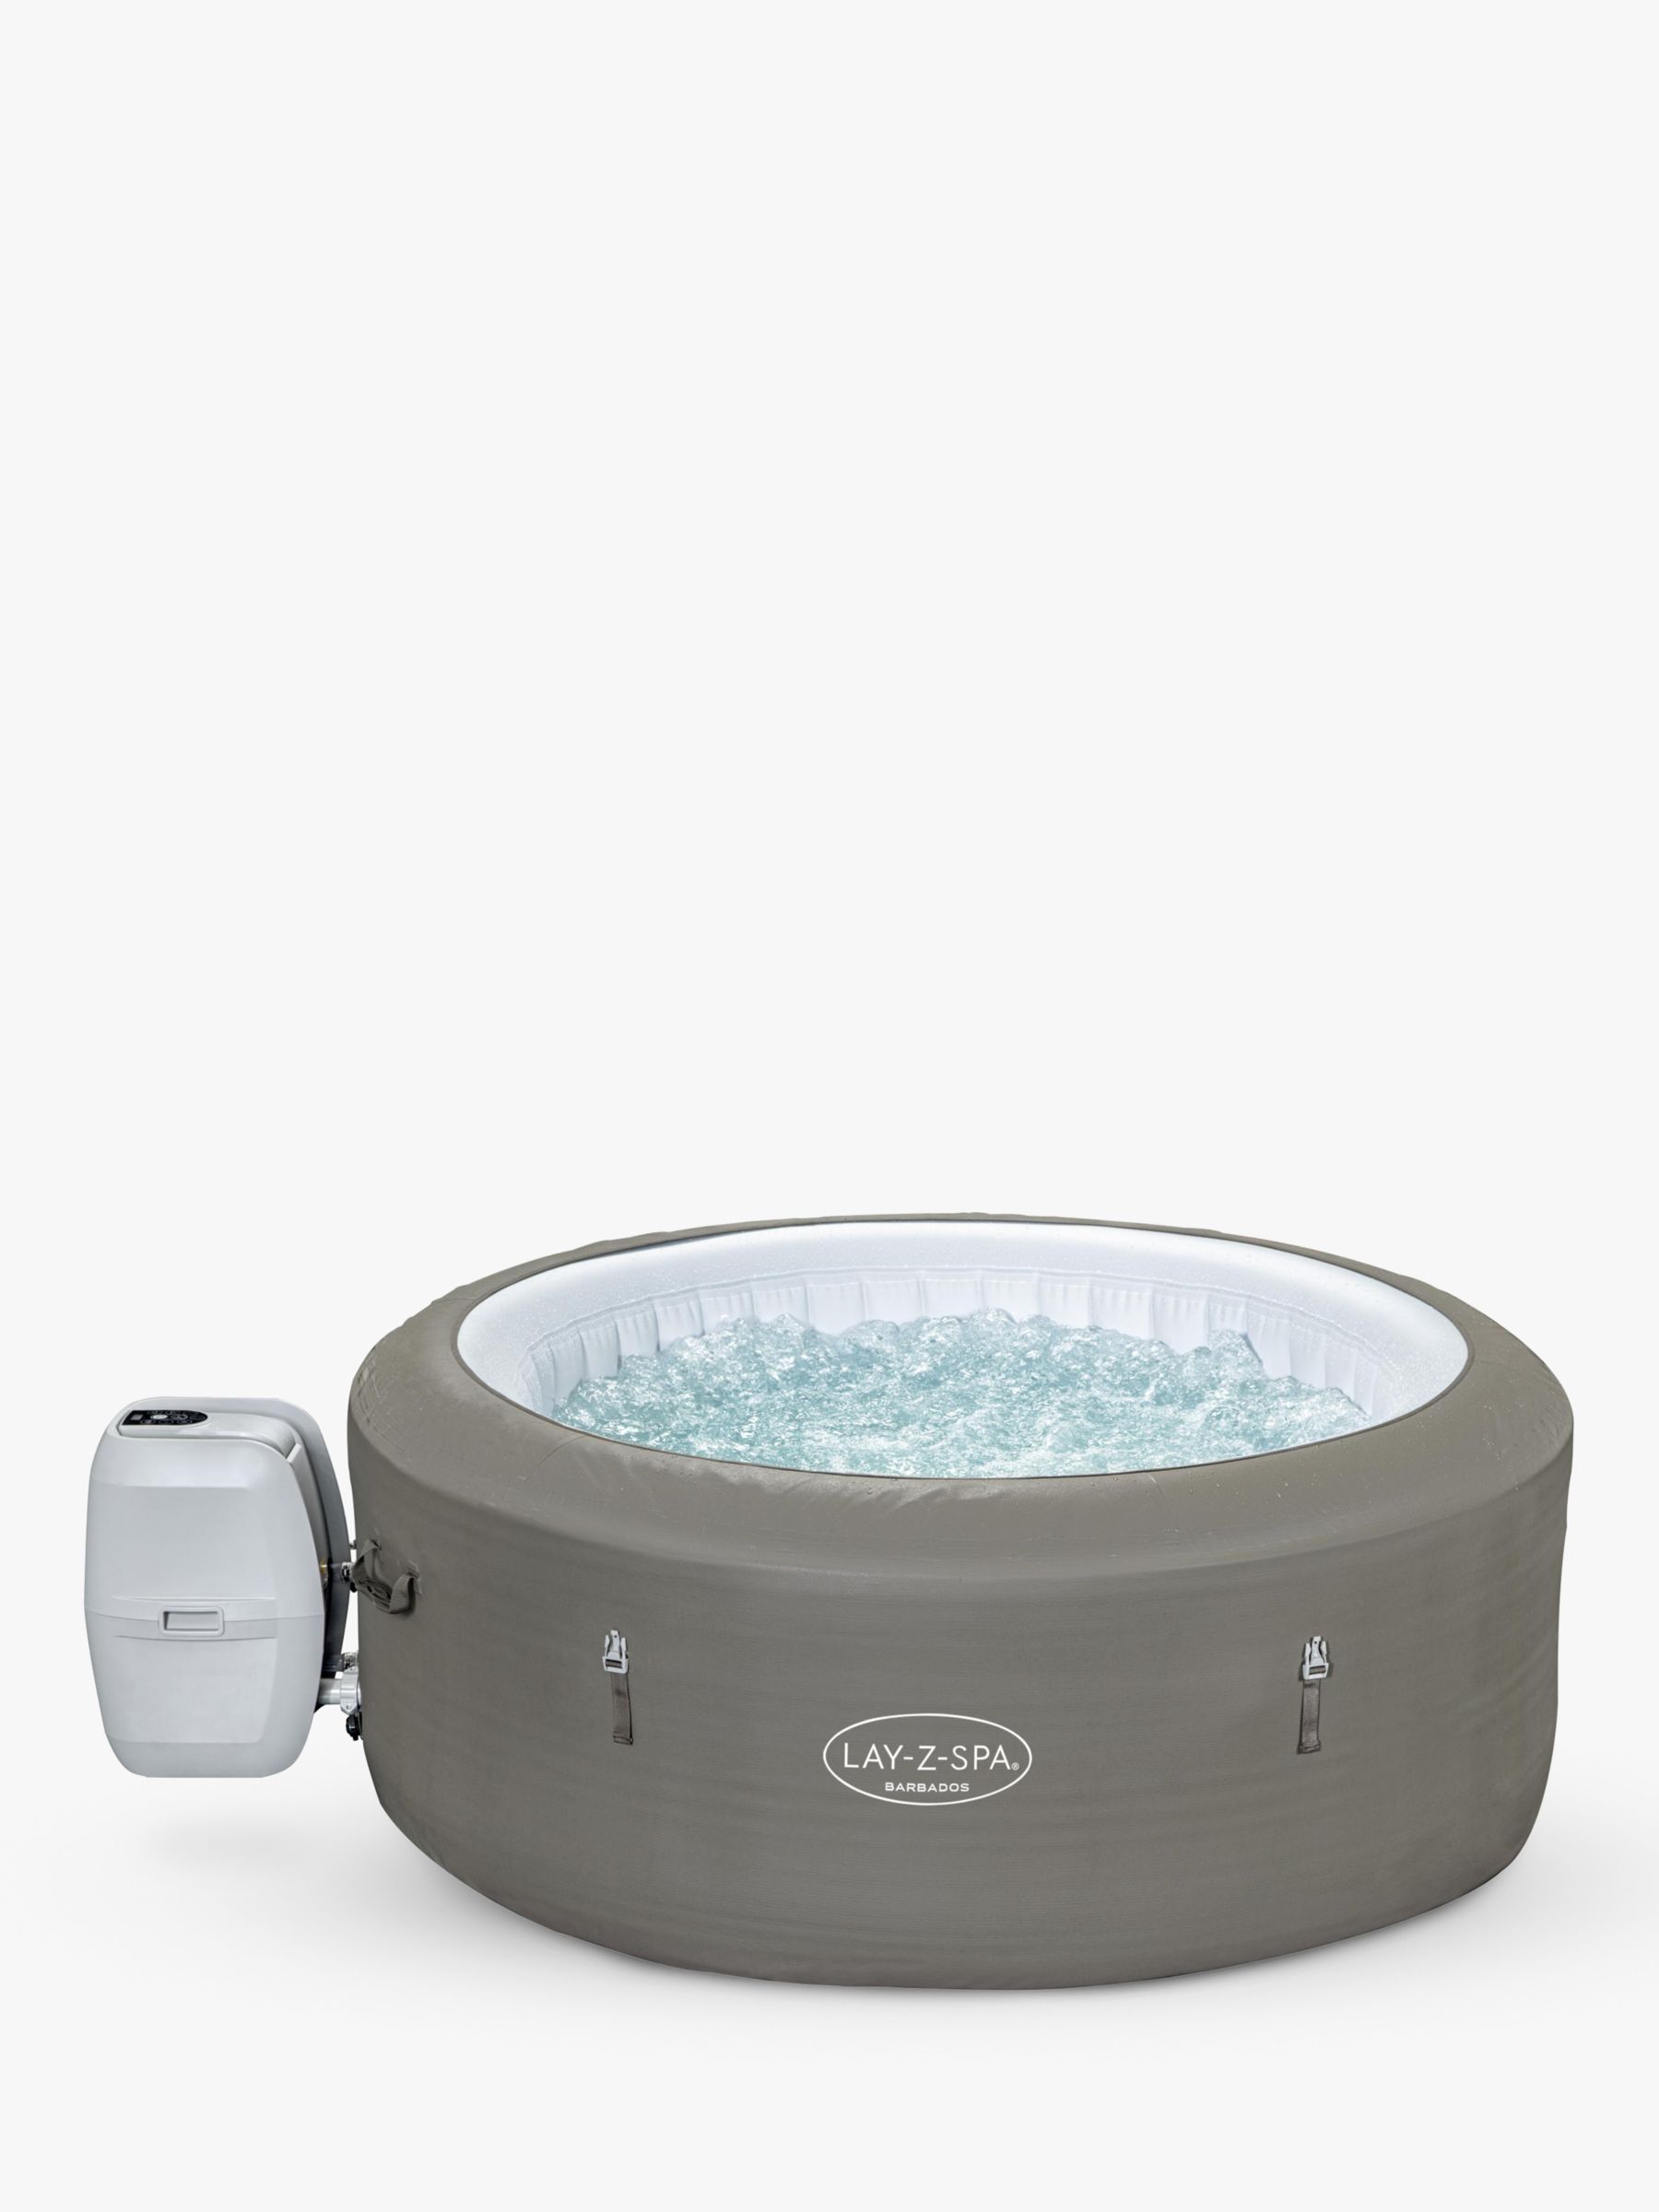 Photo of Lay-z-spa barbados airjet inflatable round hot tub with cover & clearwater spa chemical starter kit 4 person